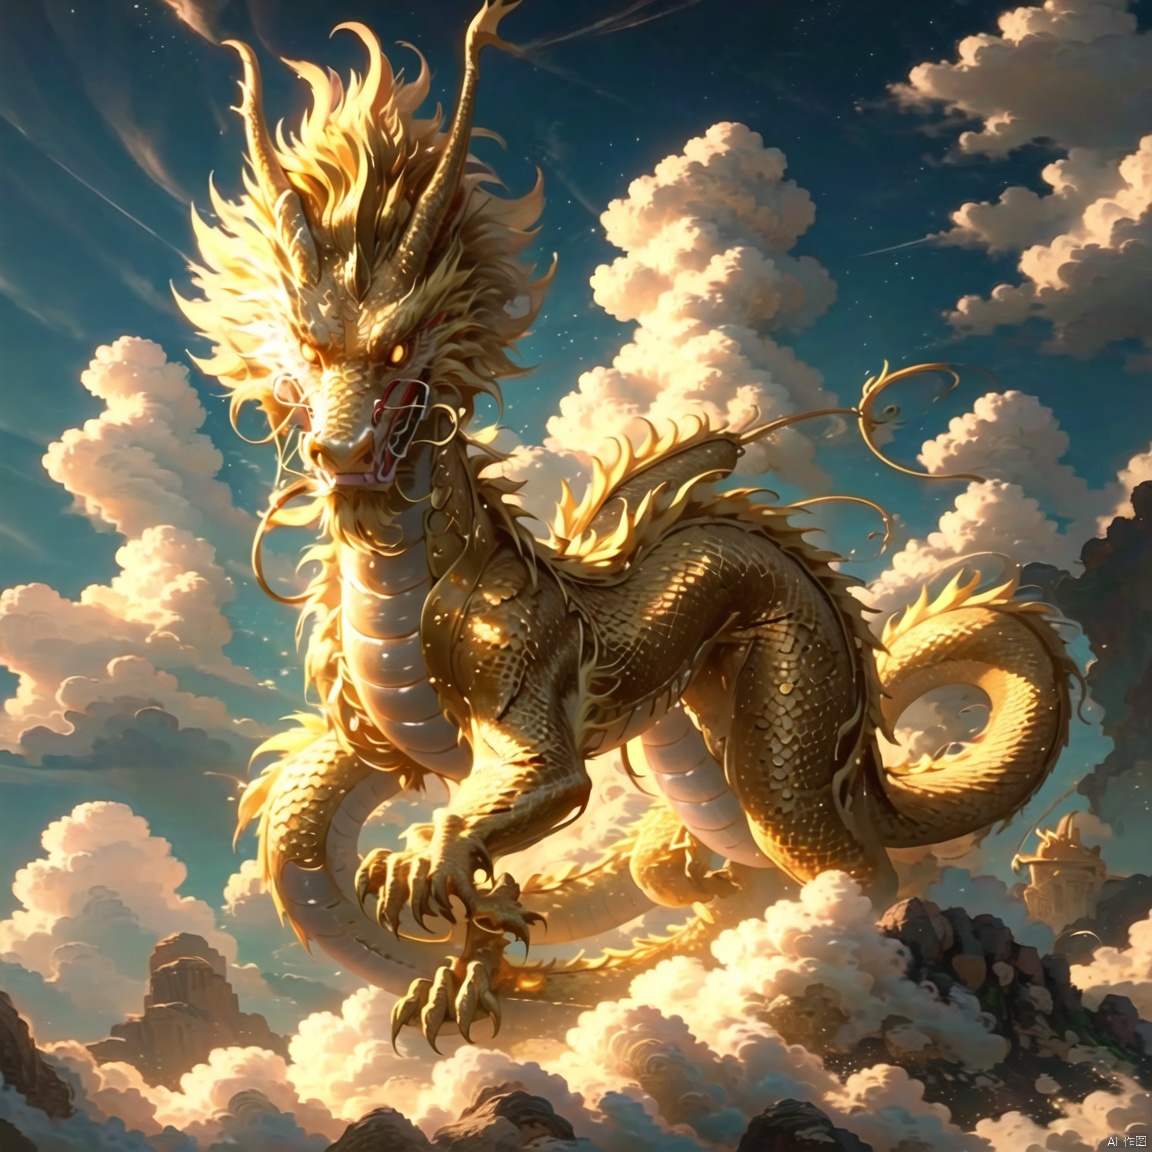 Dragon, gold, cloud, imperious